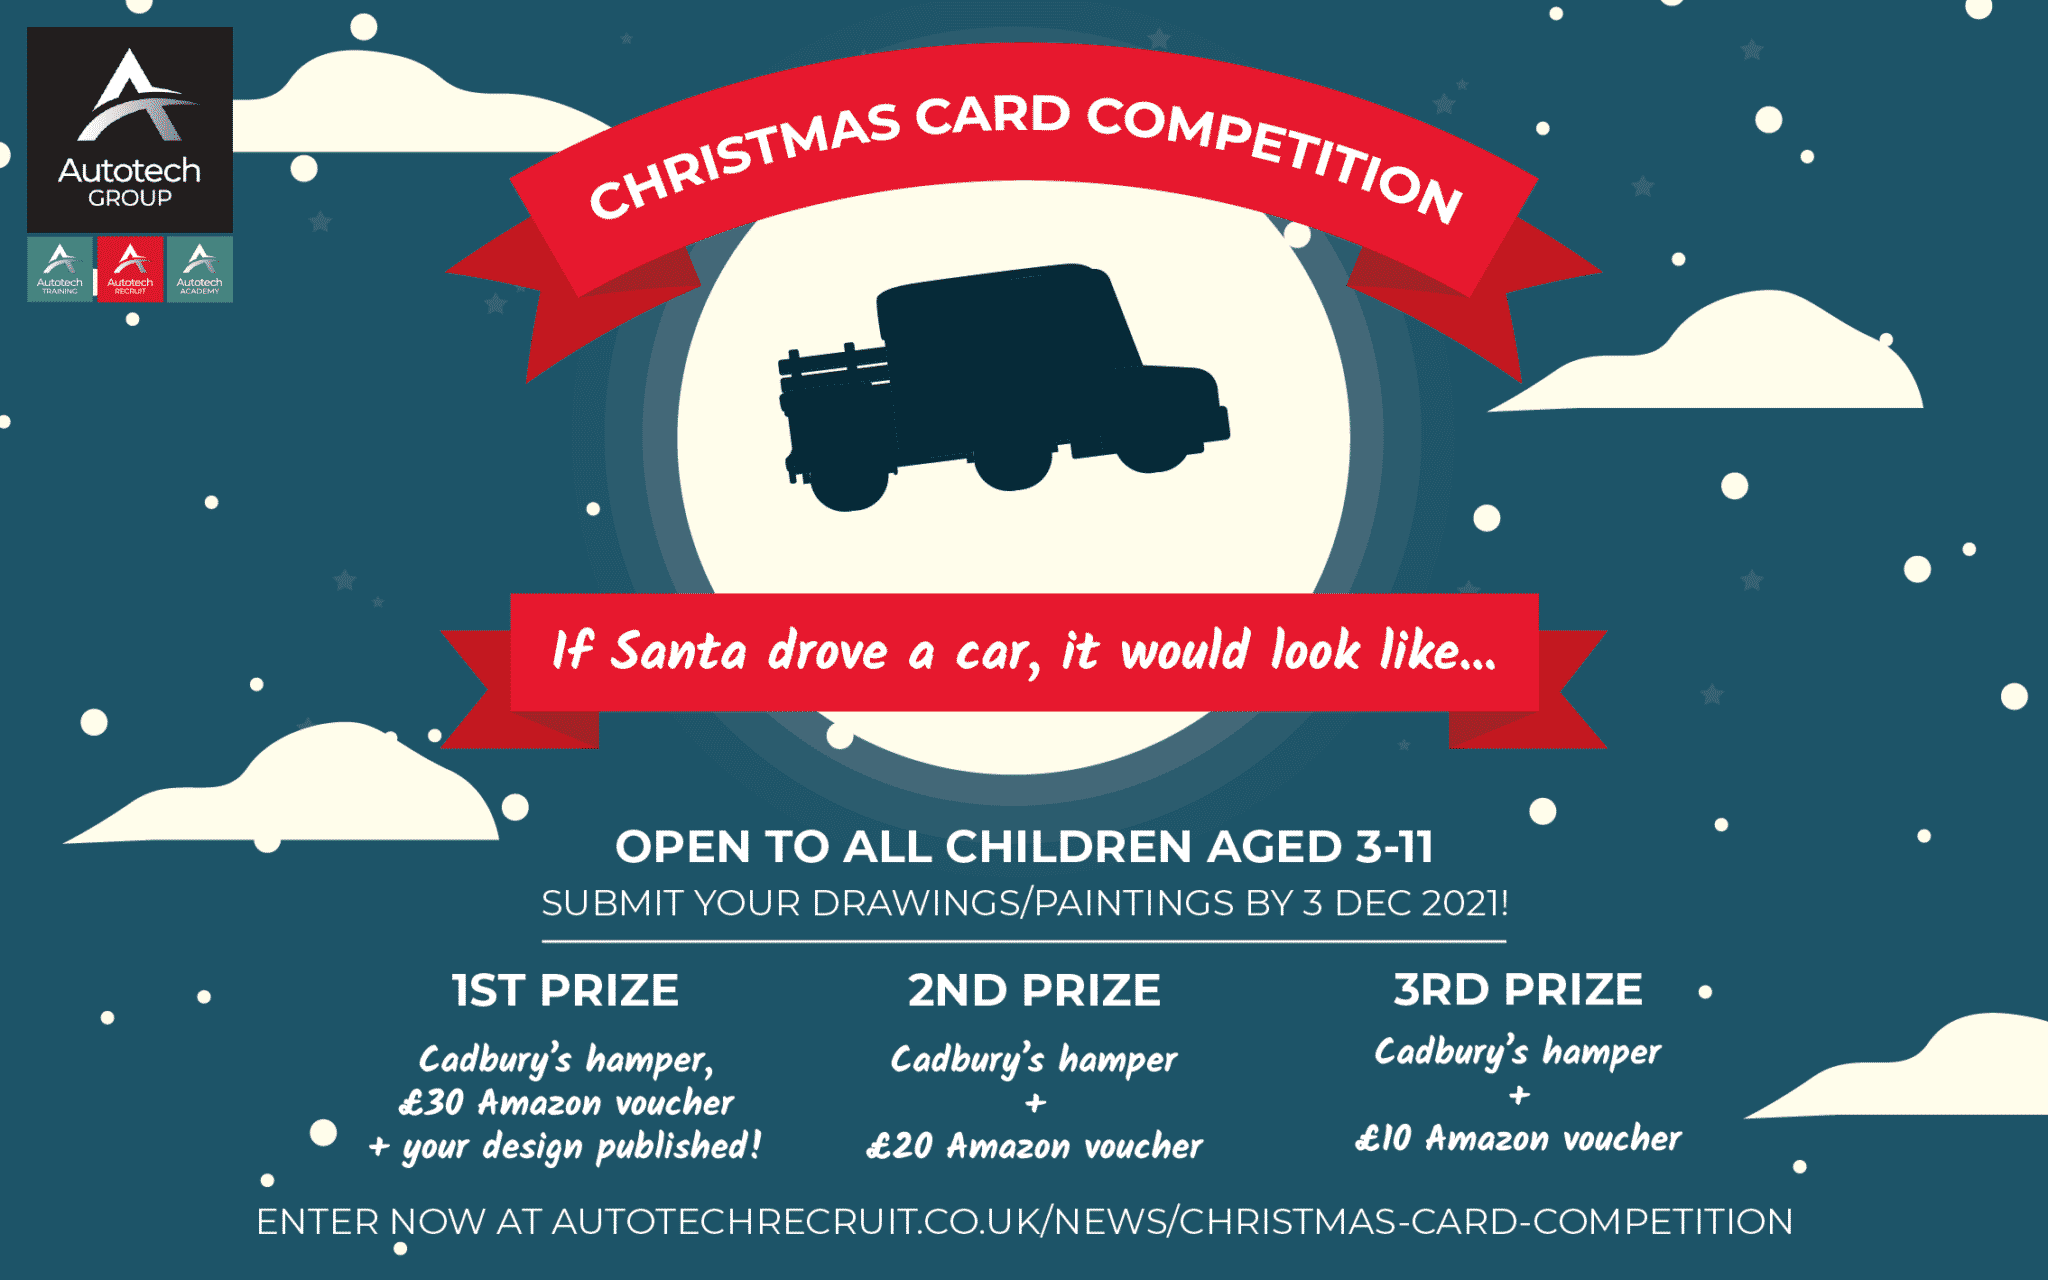 Autotech Group's Christmas Card Competition